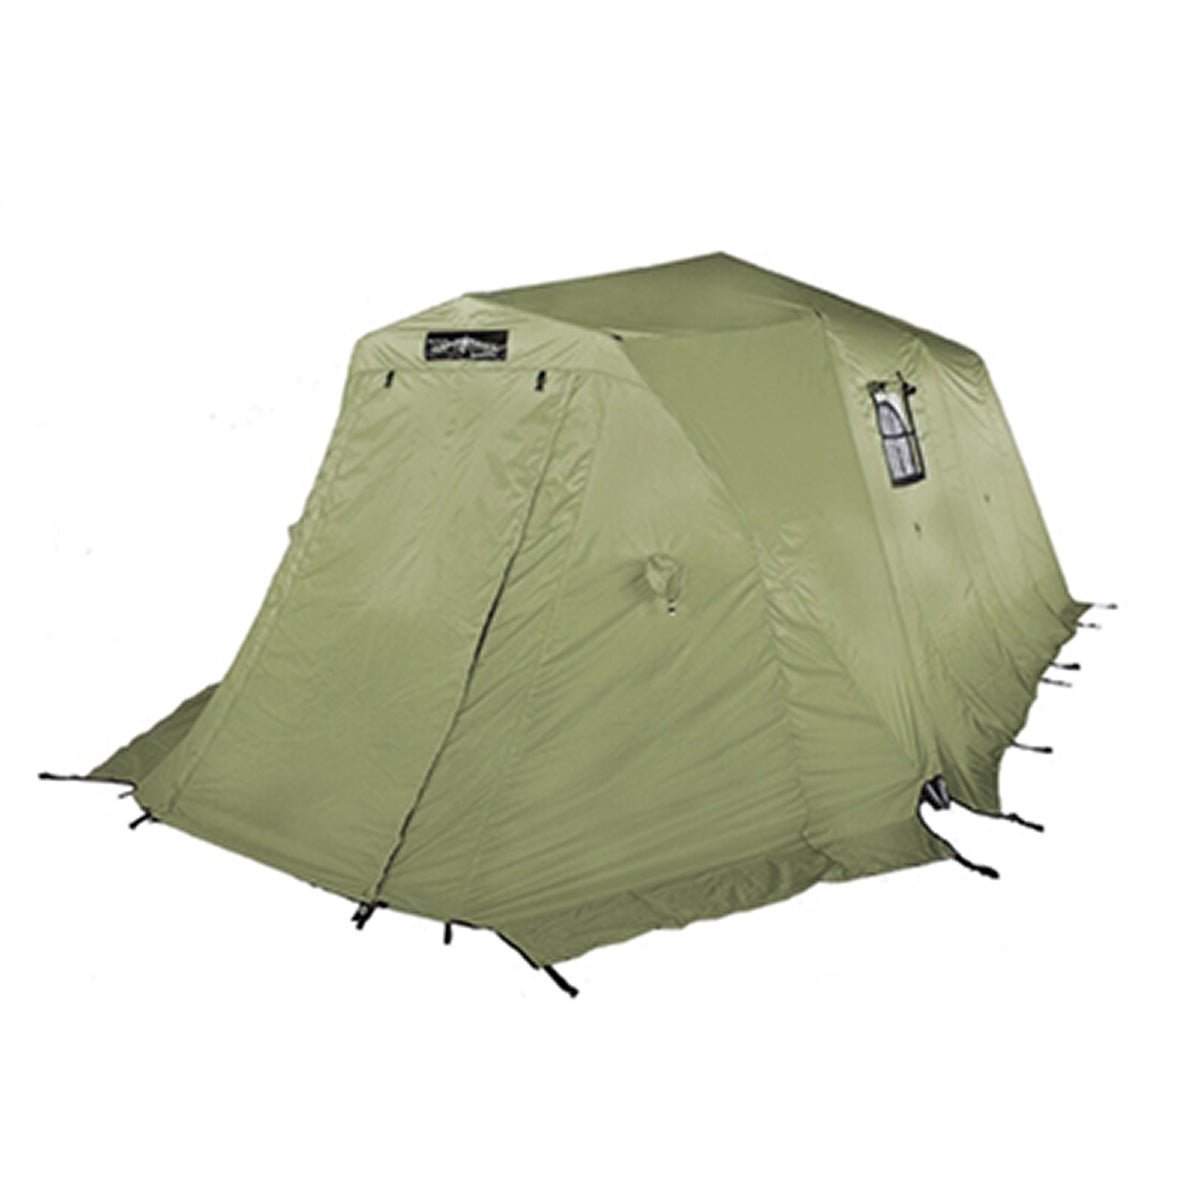 Arctix Outdoor Clothing in Camping Gear 